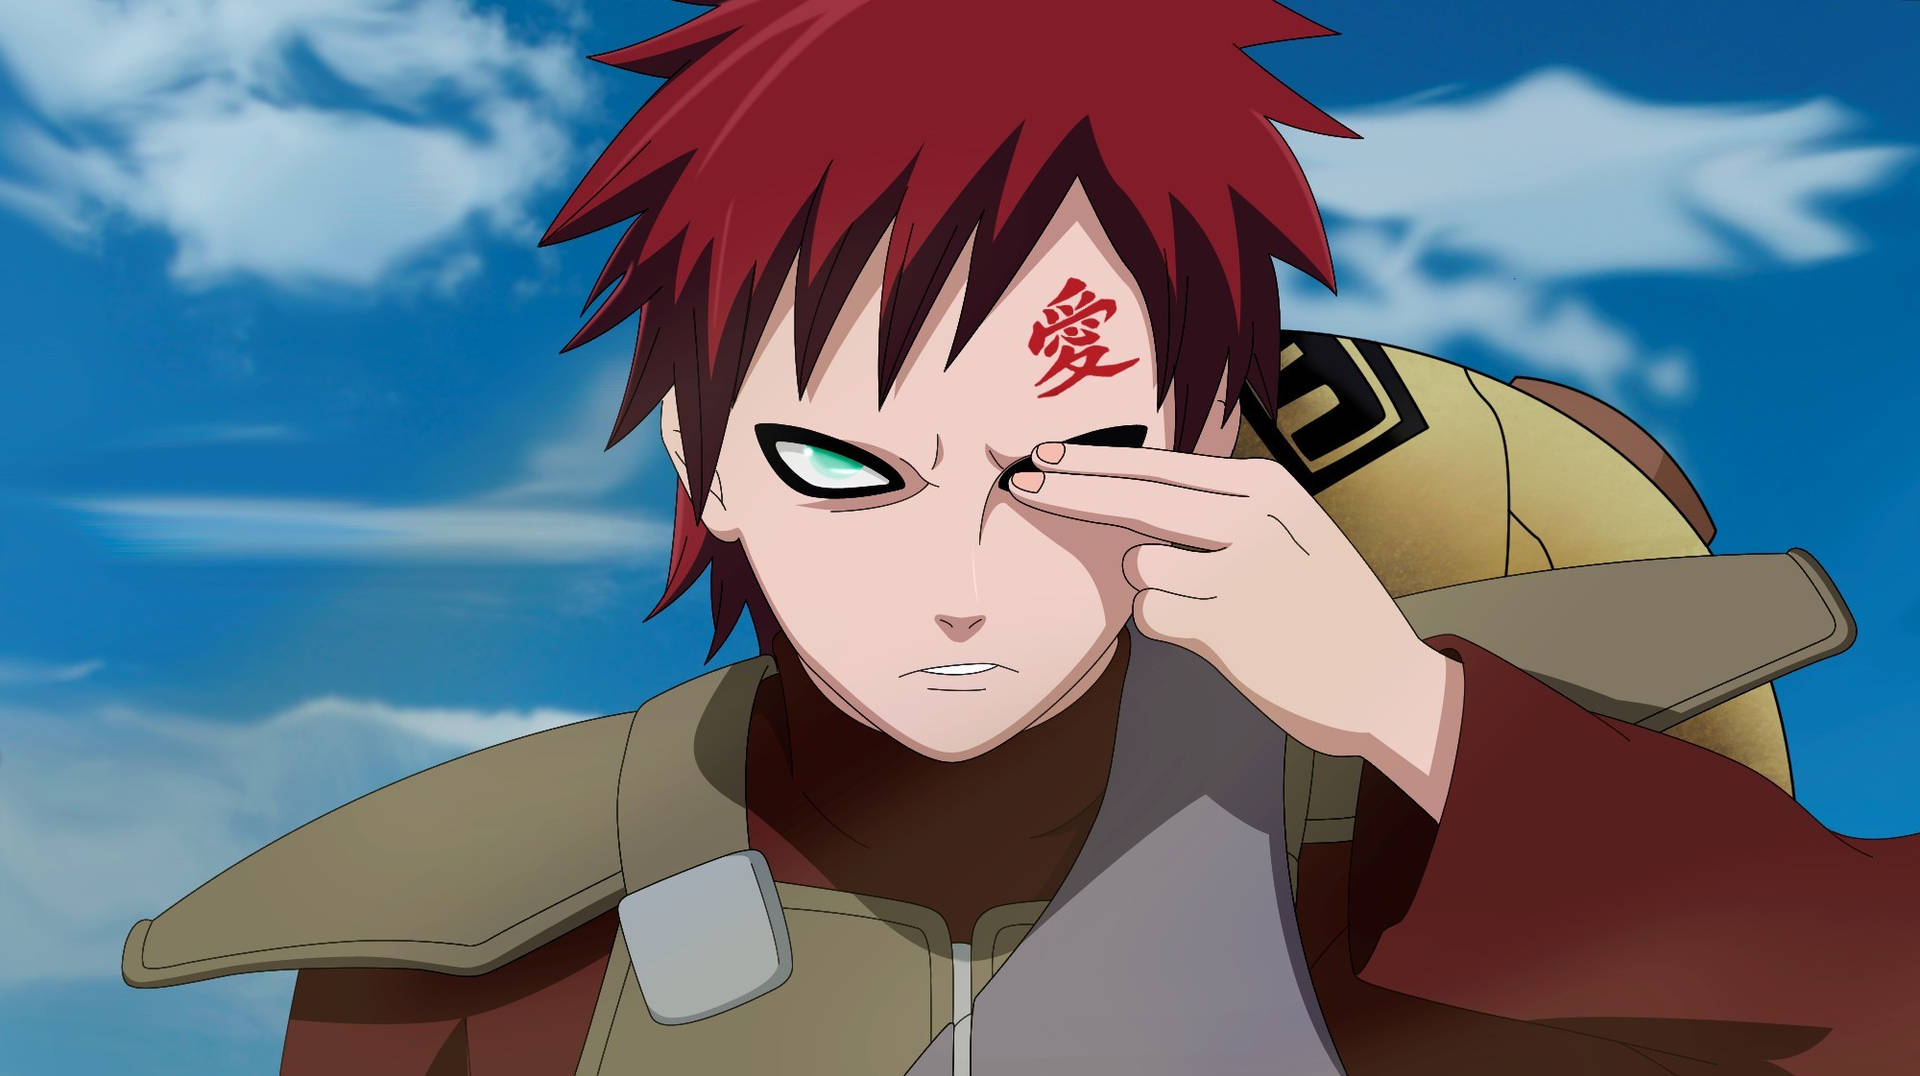 An Ipad Wallpaper Of Gaara From The Anime Series Naruto Focusing And Staring At Something, With Two Of His Fingers Covering His Right Eye.